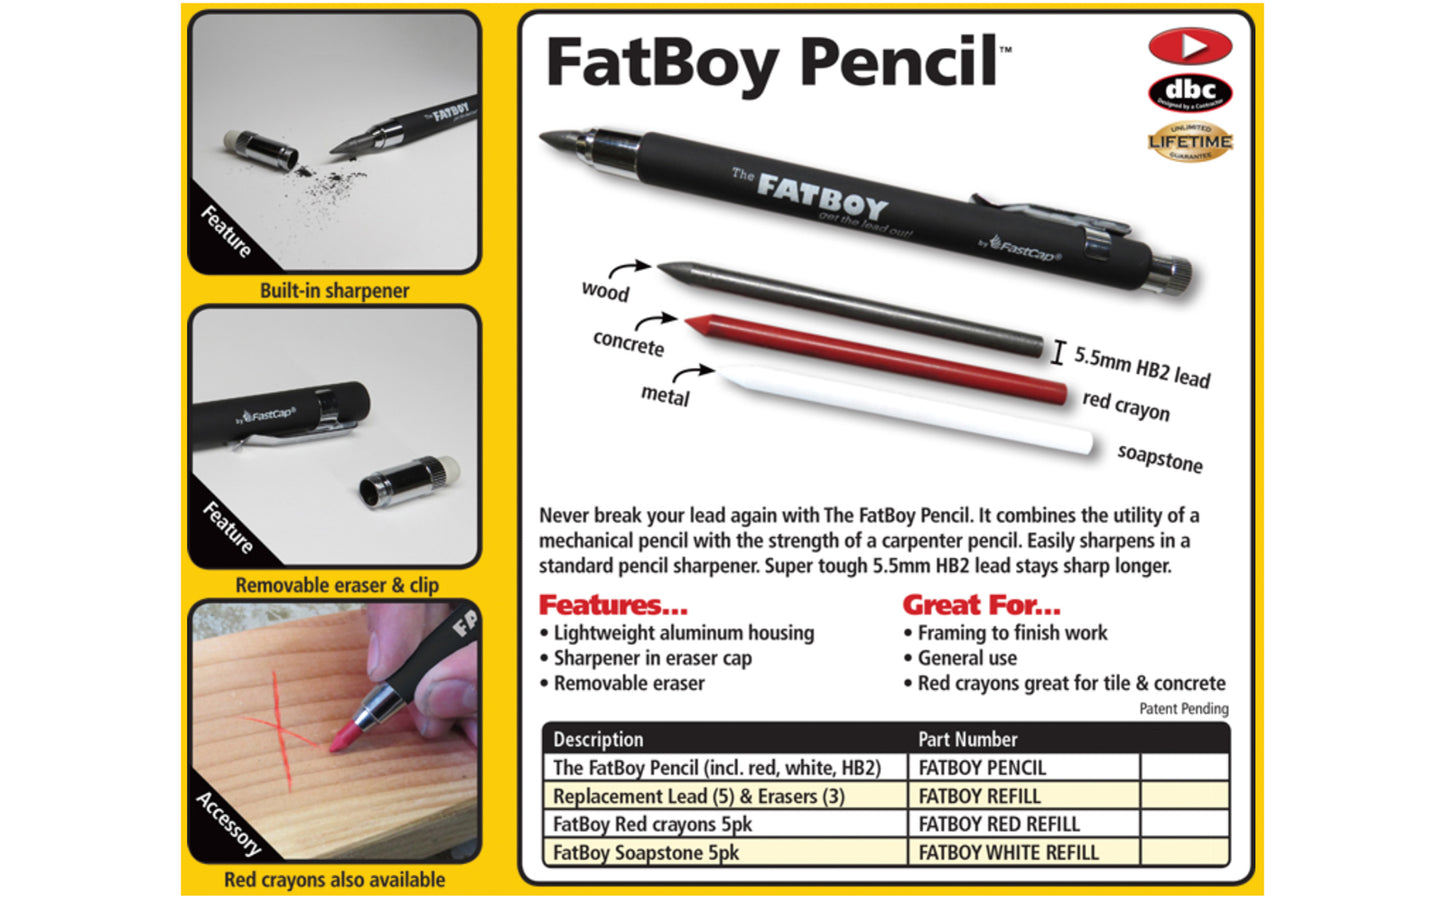 FastCap Professional Carpenter / Mechanical FatBoy Pencil - Combines the utility of a mechanical pencil with the strength of a carpenter pencil - Lead for wood - Soapstone for metal - Red crayon for concrete